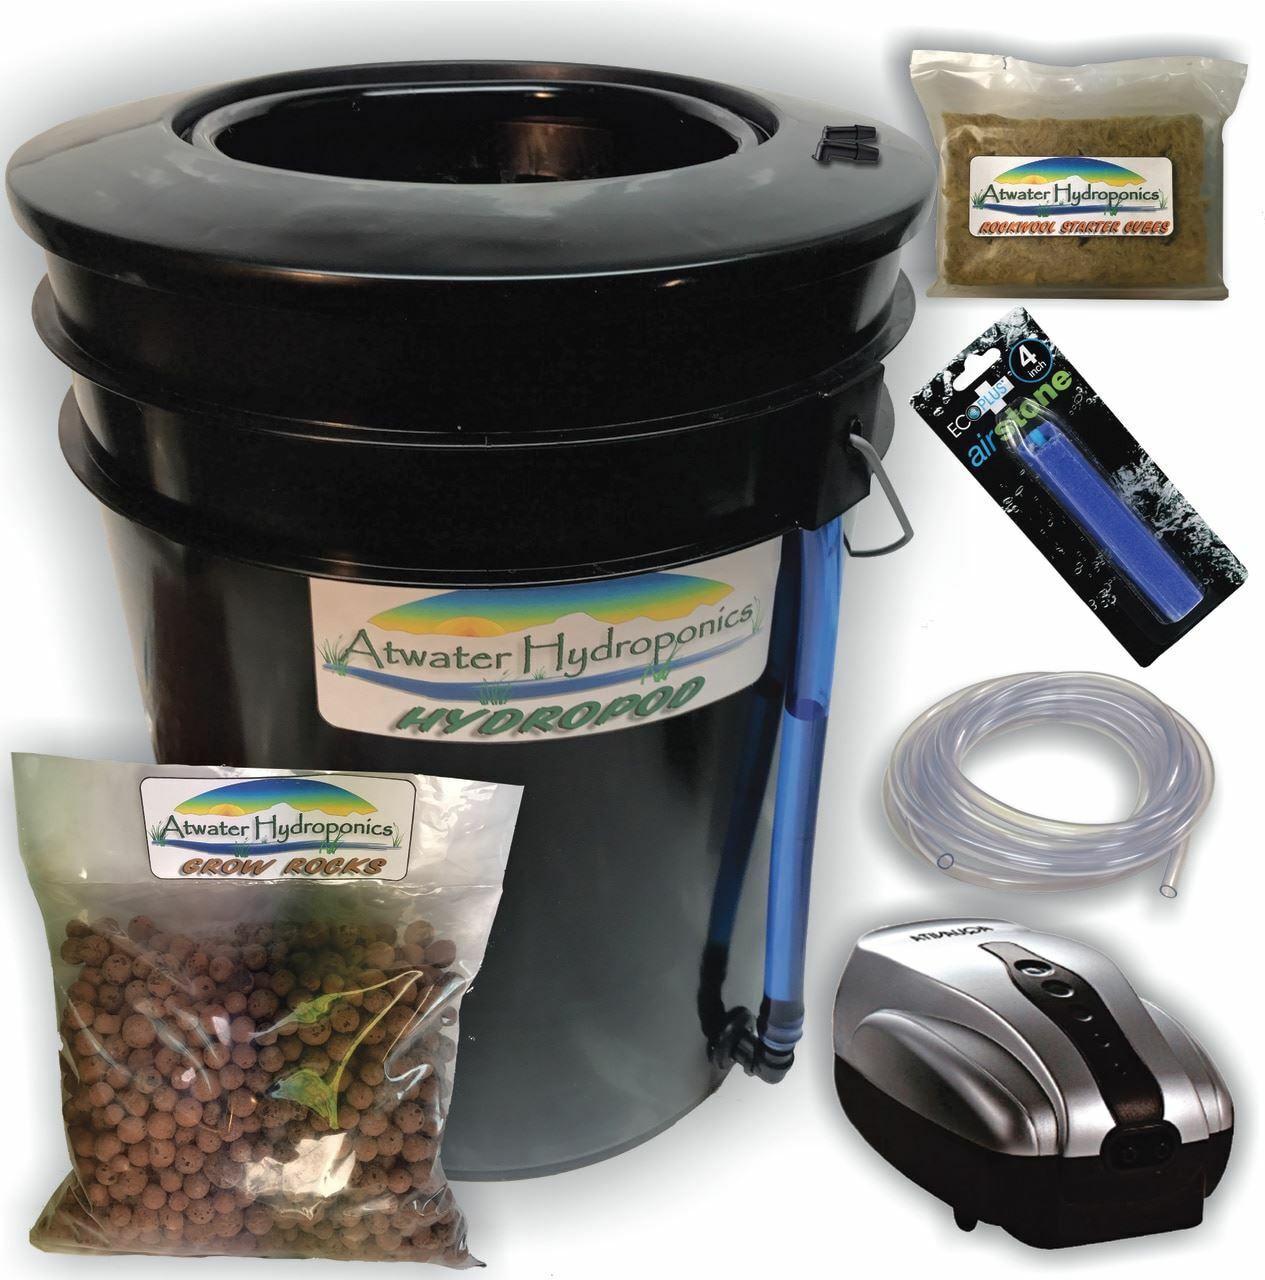 The Atwater HydroPod - Standard DWC System - No Nutrients or pH Testing